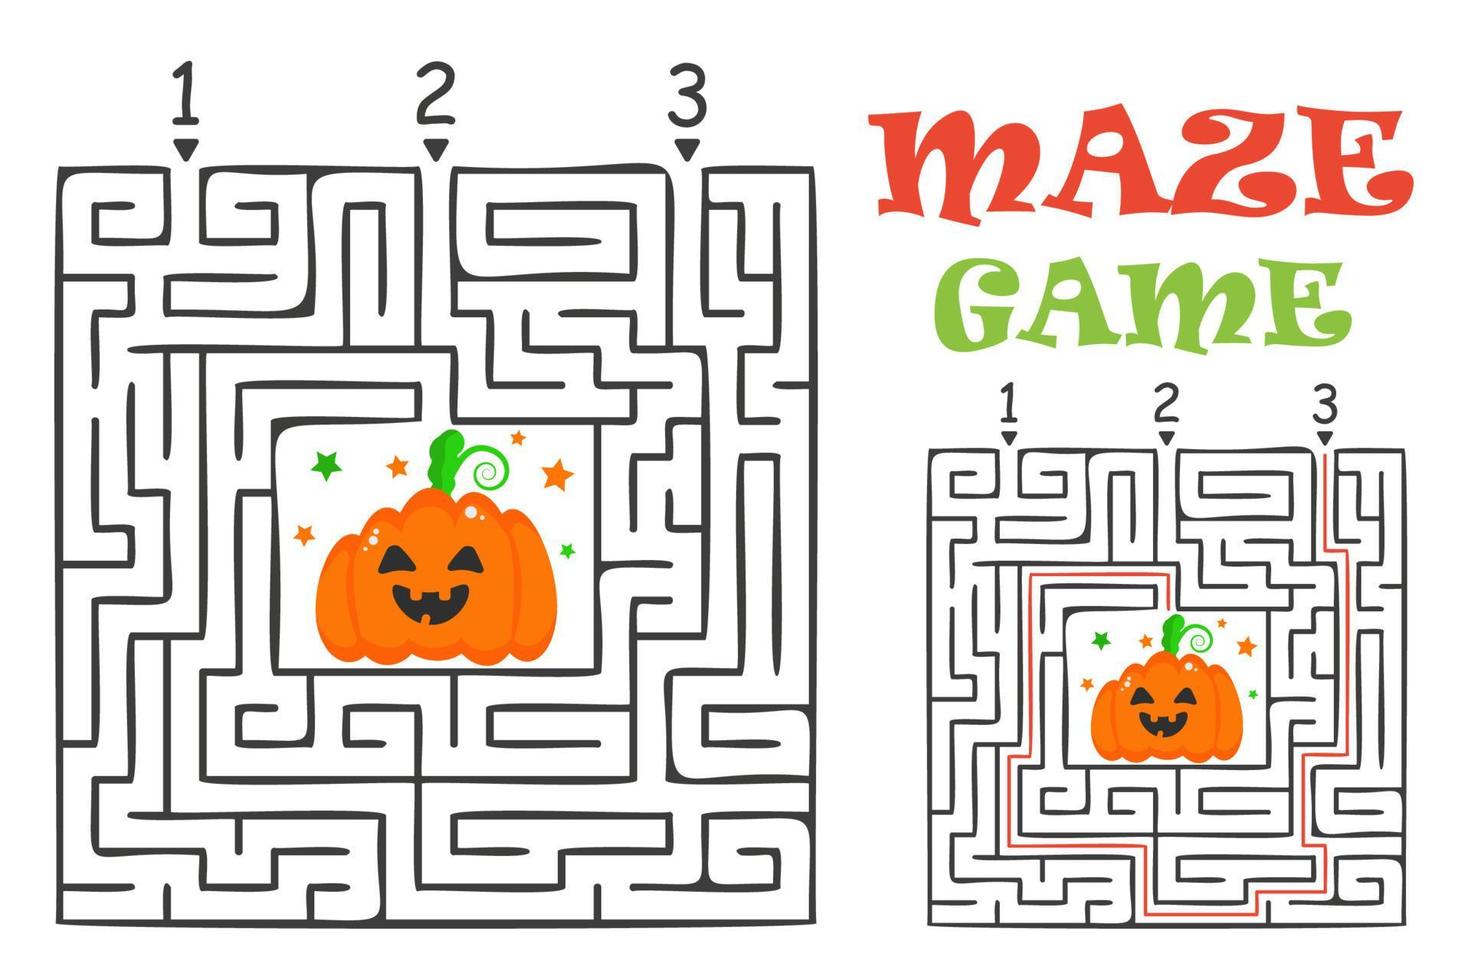 Rectangular halloween maze labyrinth game for kids. Labyrinth logic conundrum. Three entrance and one right way to go. Vector flat illustration isolated on white background.